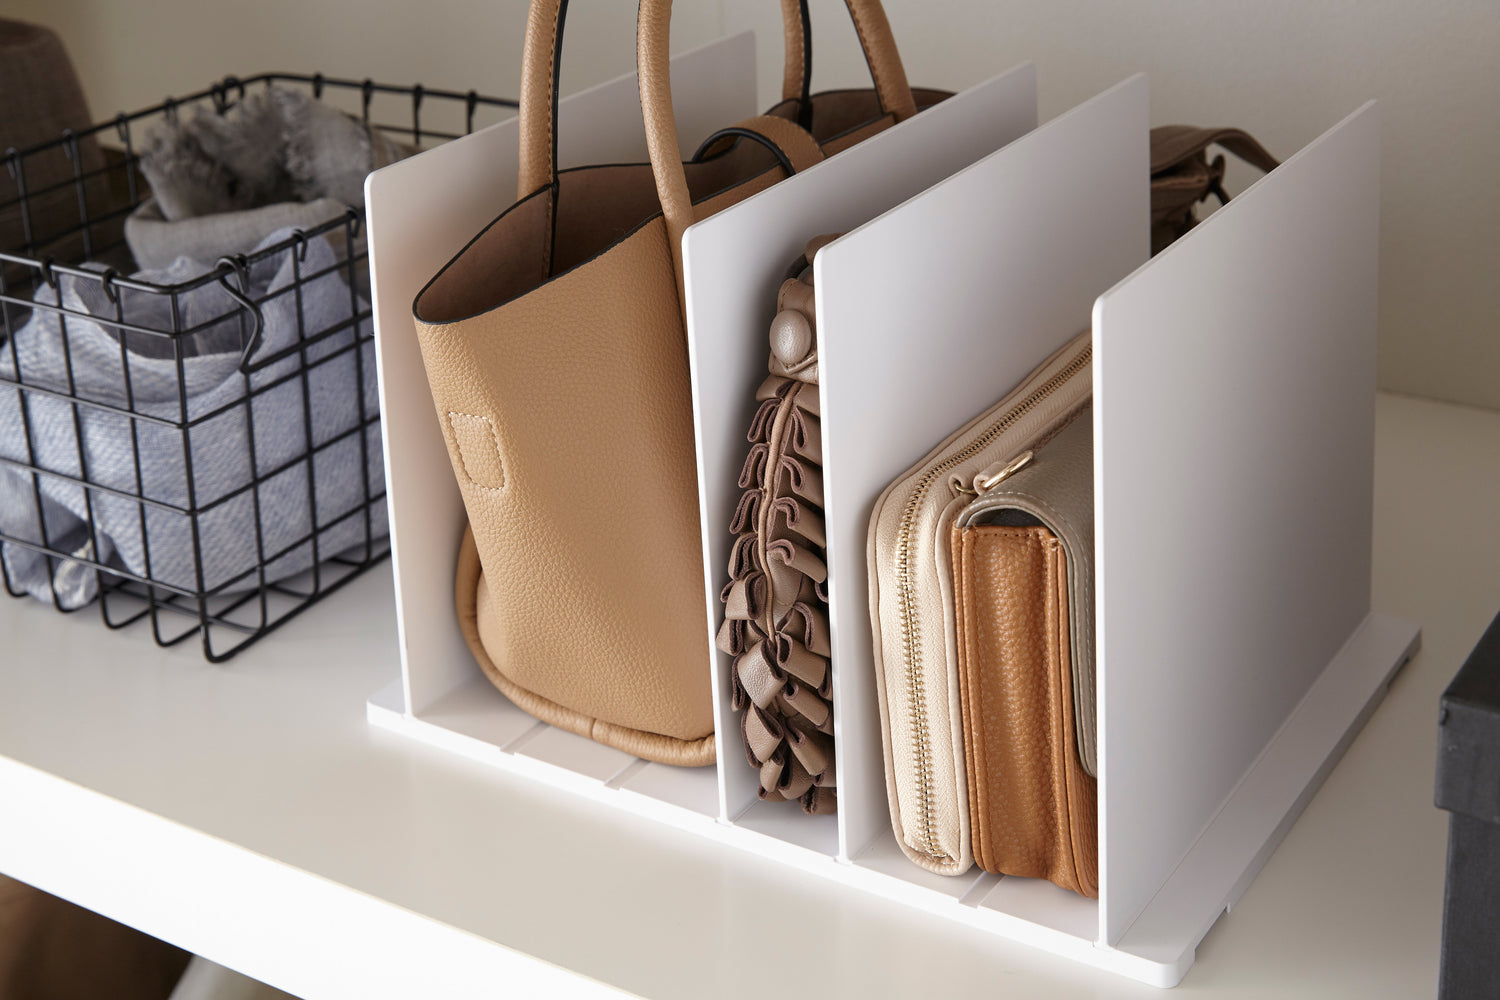 View 3 - White Bag Organizer with Customizable Dividers displaying purses in closet by Yamazaki Home.